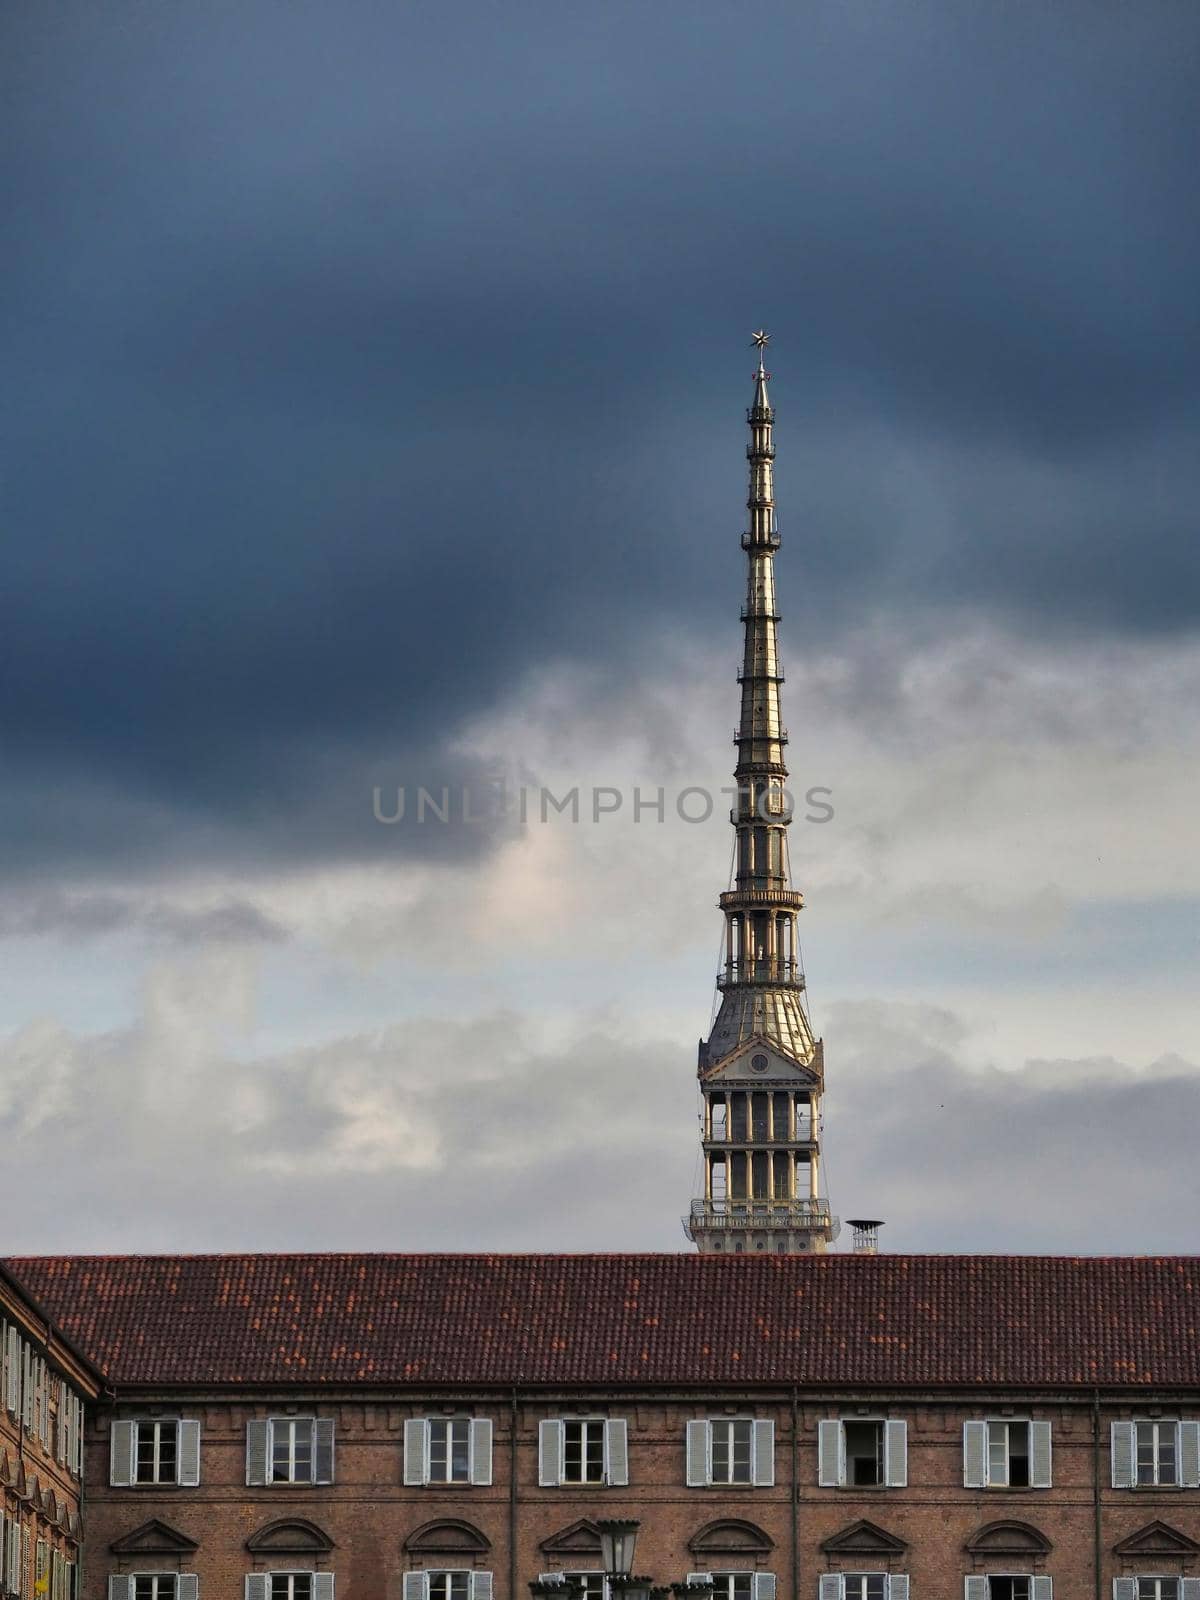 Scenic view of the spire of one of the city symbols, the mole antonelliana, from piazza castello under cloudy stormy sky Turin Italy October 10 2020